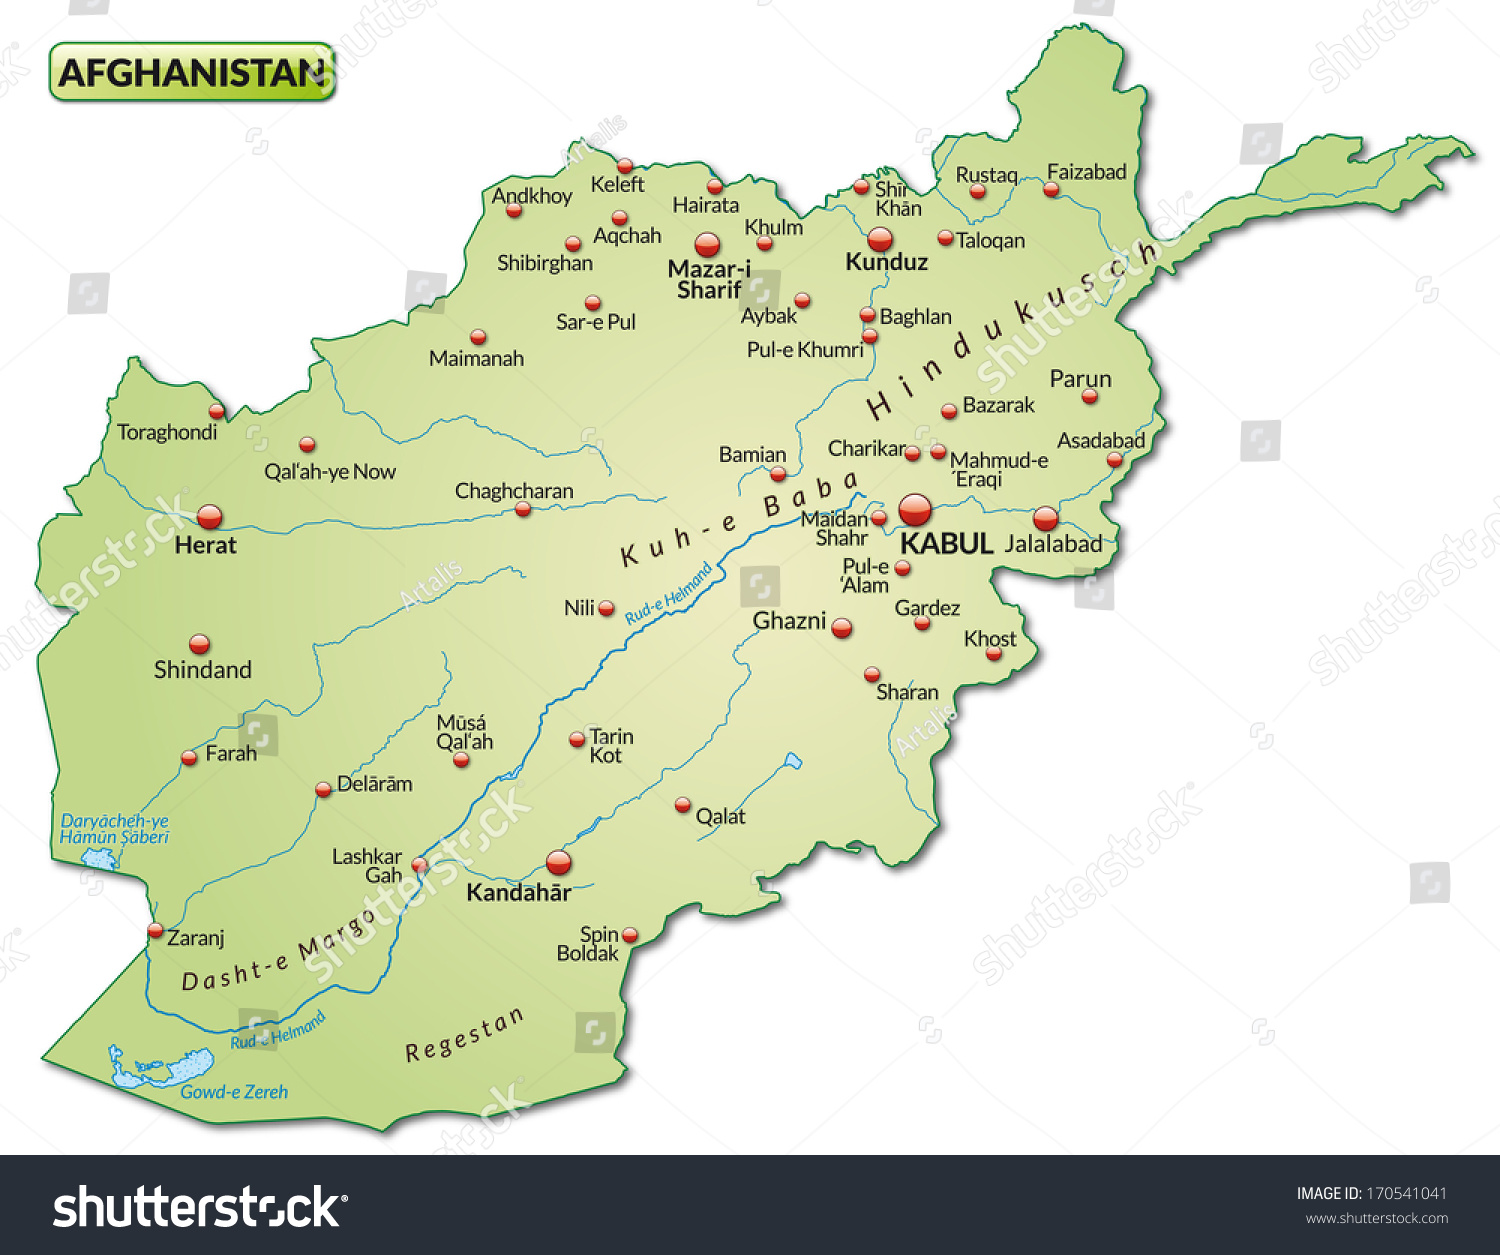 Map of Afghanistan as an overview map in pastel green #170541041